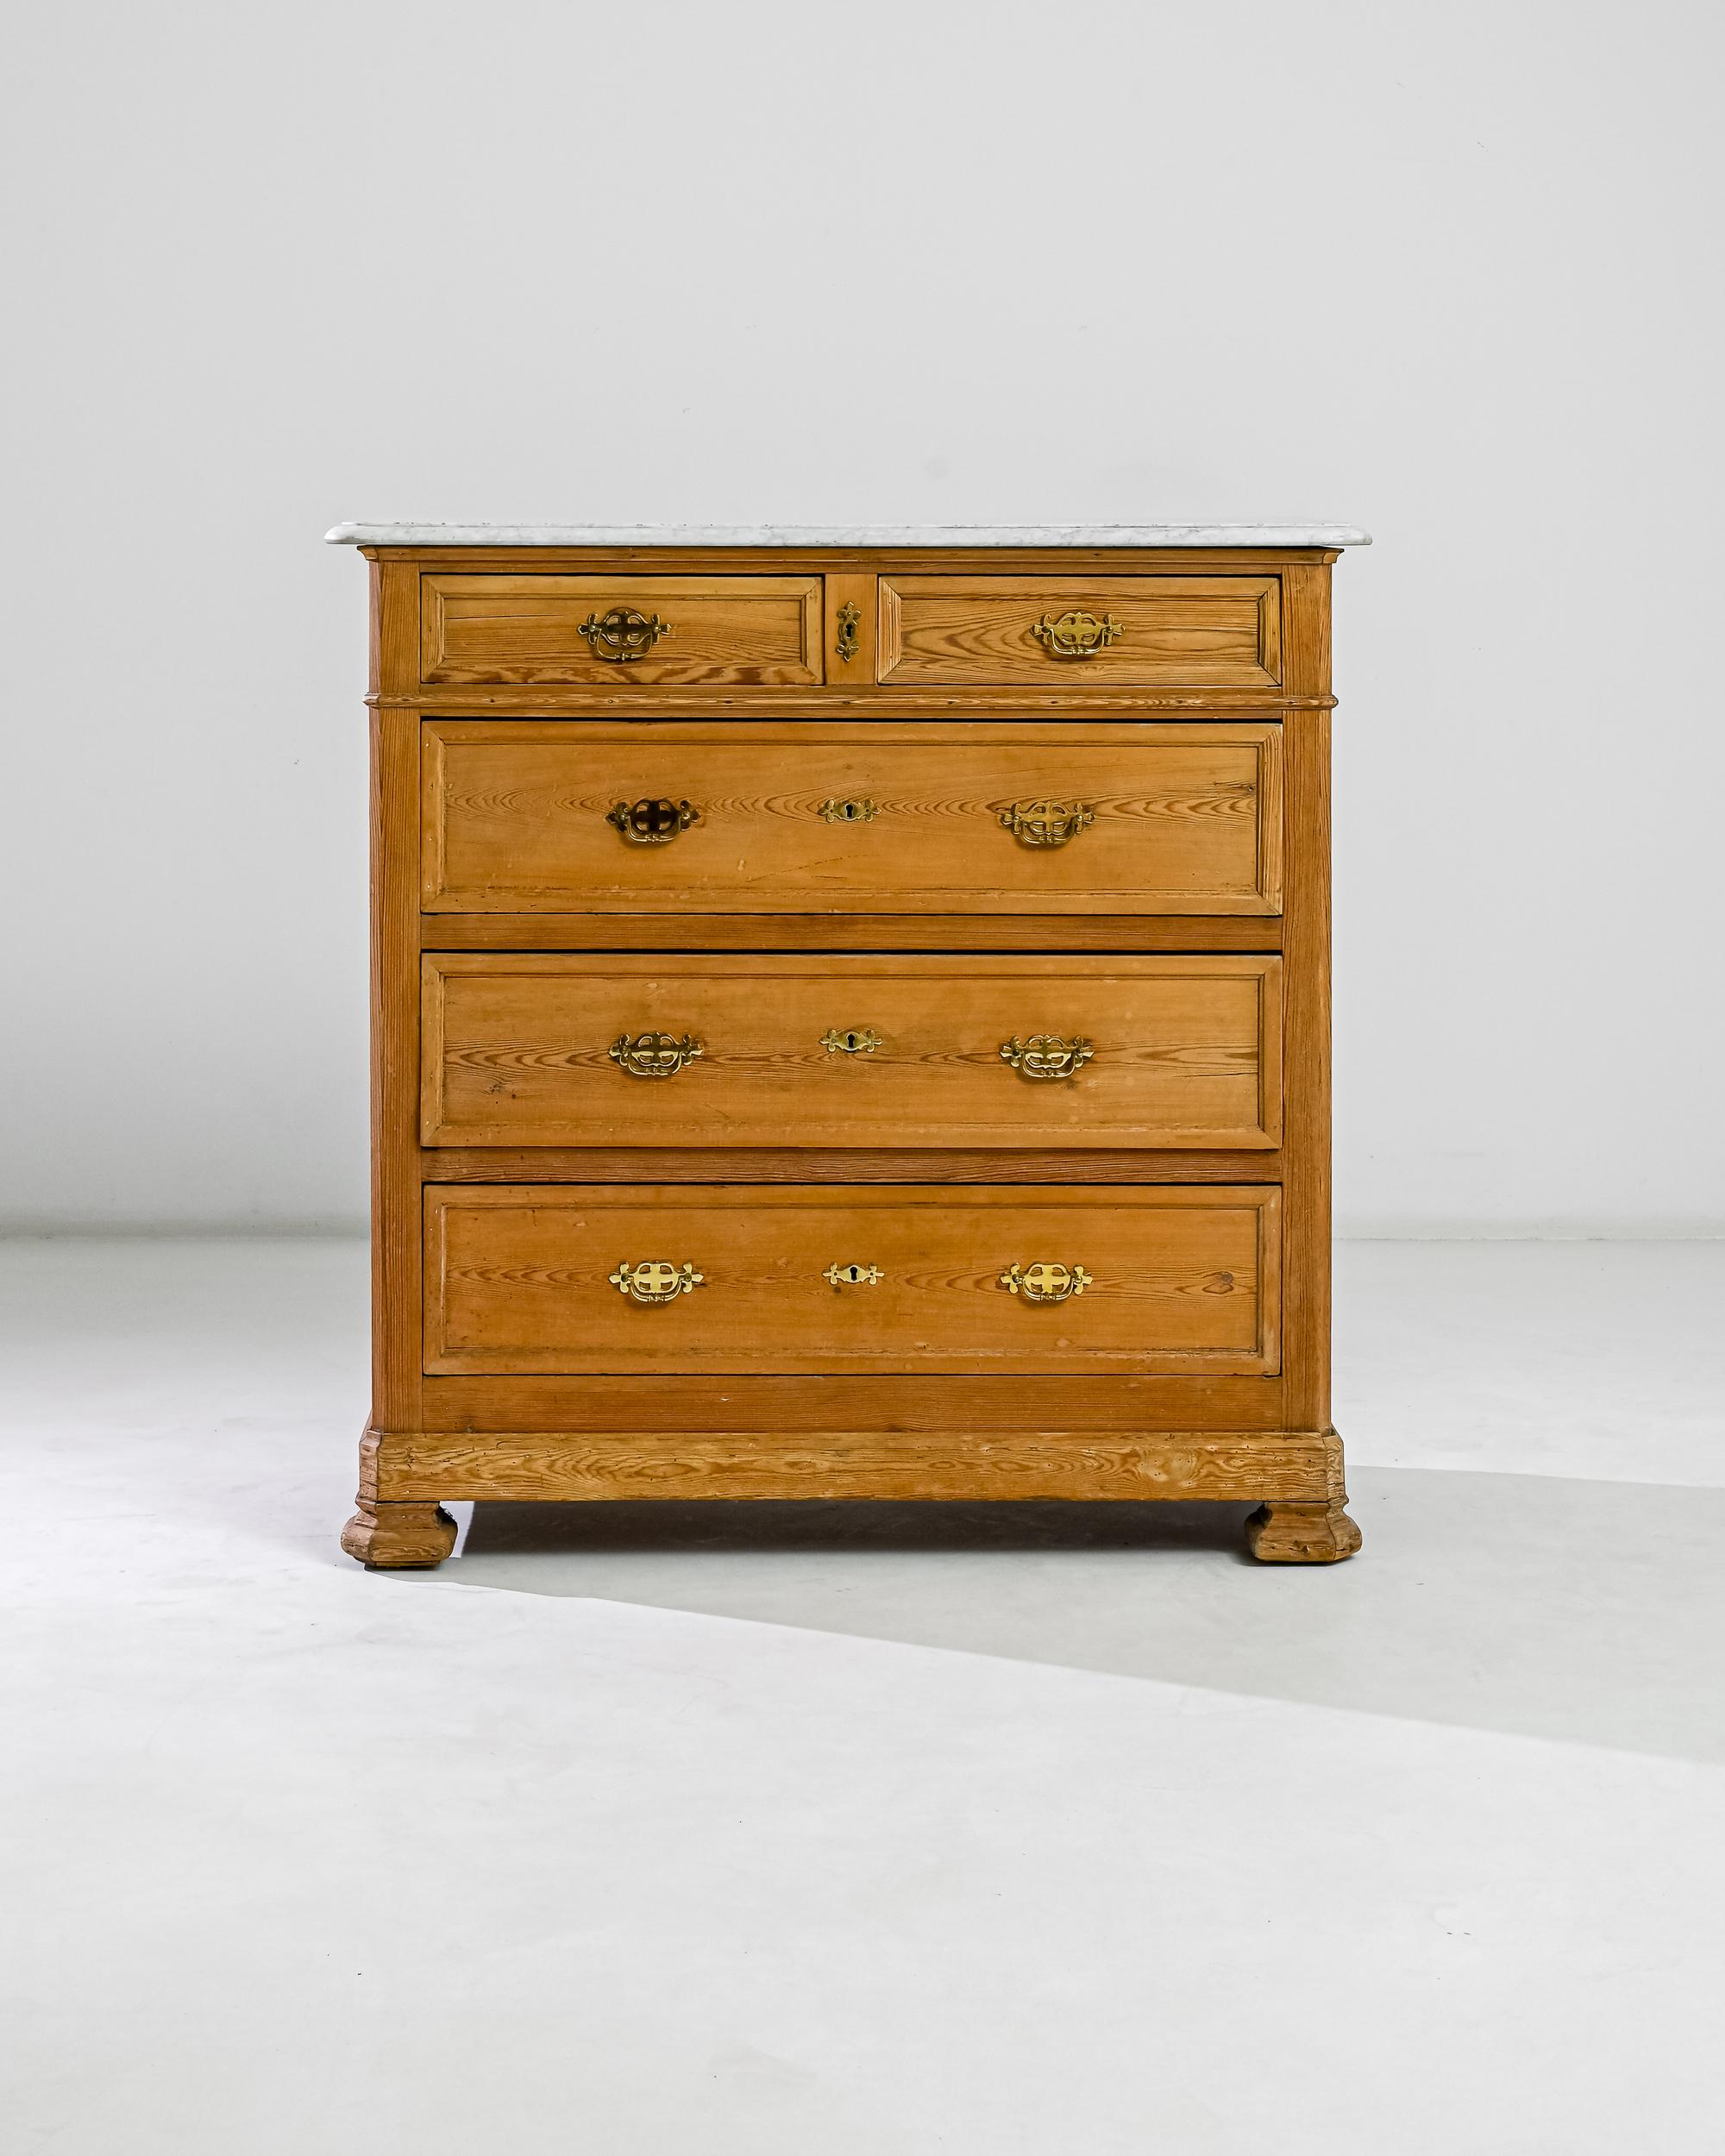 This 19th century chifonier made in France boasts a refined marble top, resting over a wooden case with three deep and two shallow drawers adorned by gilded bail pulls. A curious angularity of its sturdy feet accentuate a noble neoclassical profile